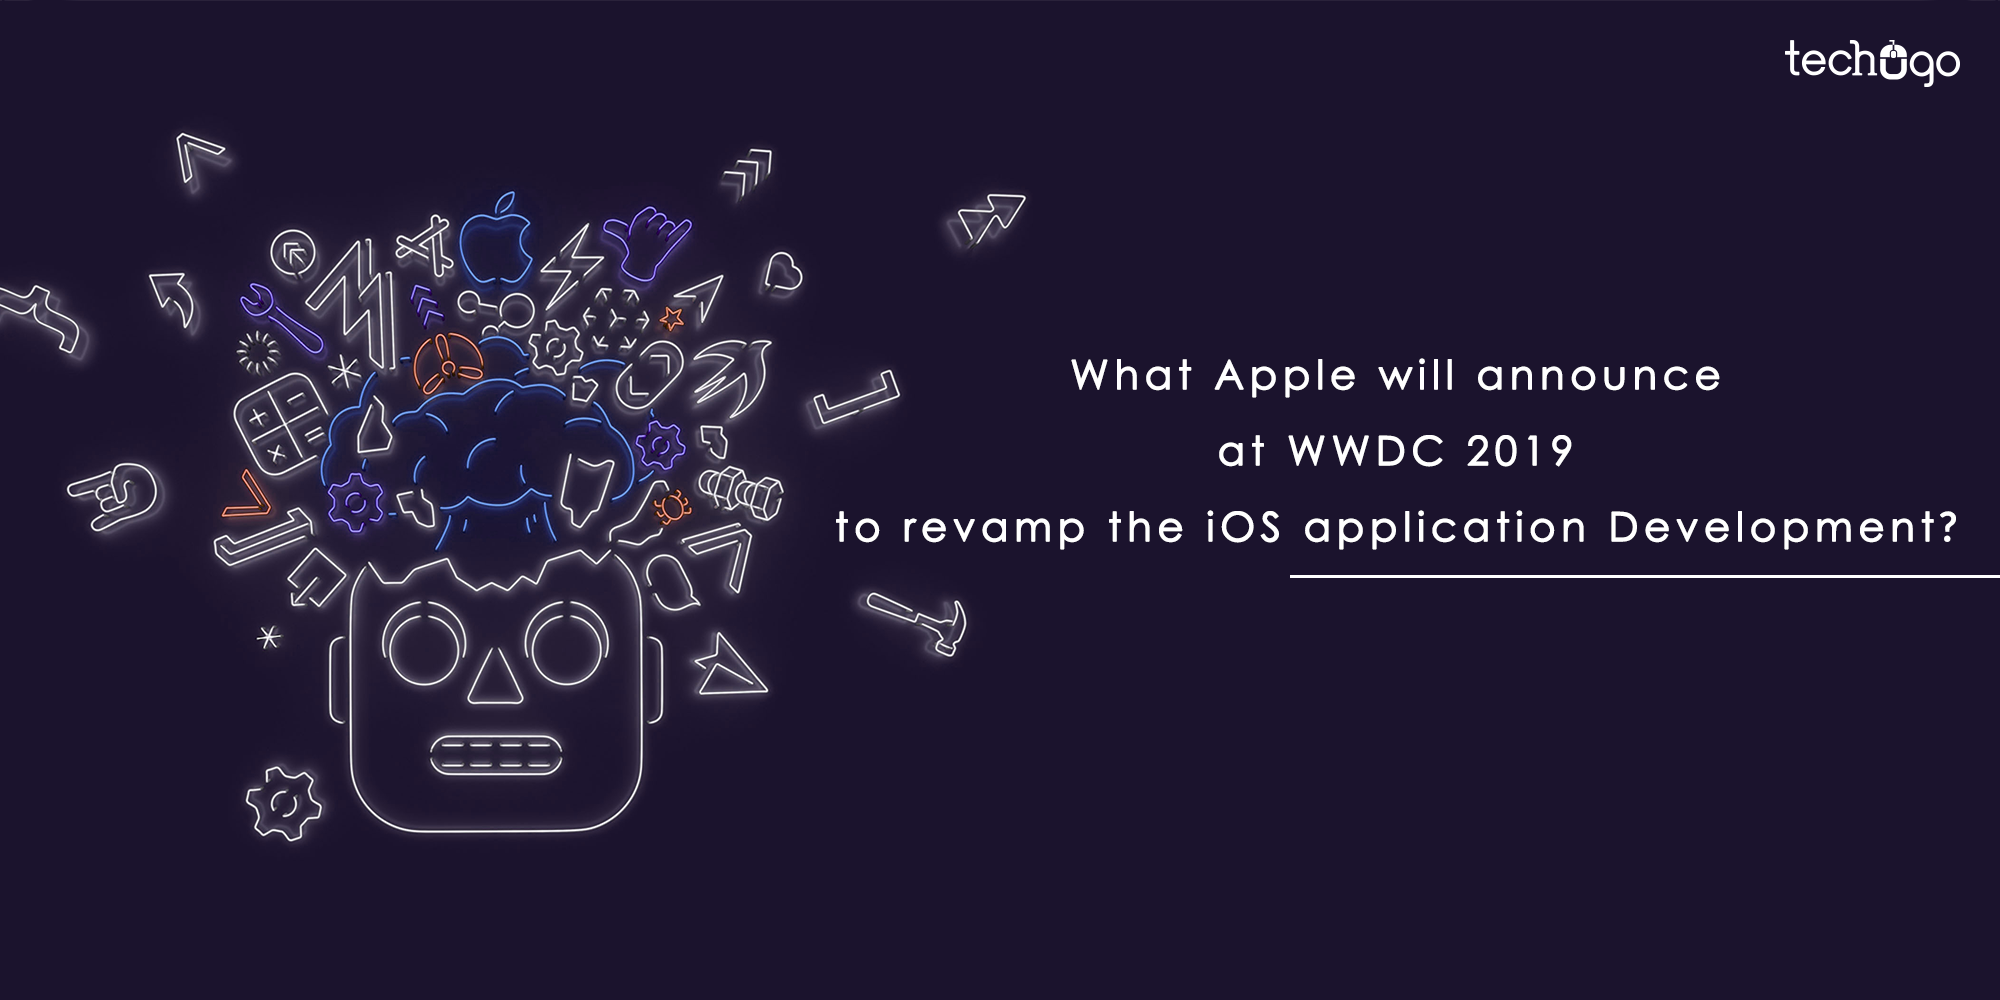 What Apple will announce at WWDC 2019 to revamp the iOS application Development?